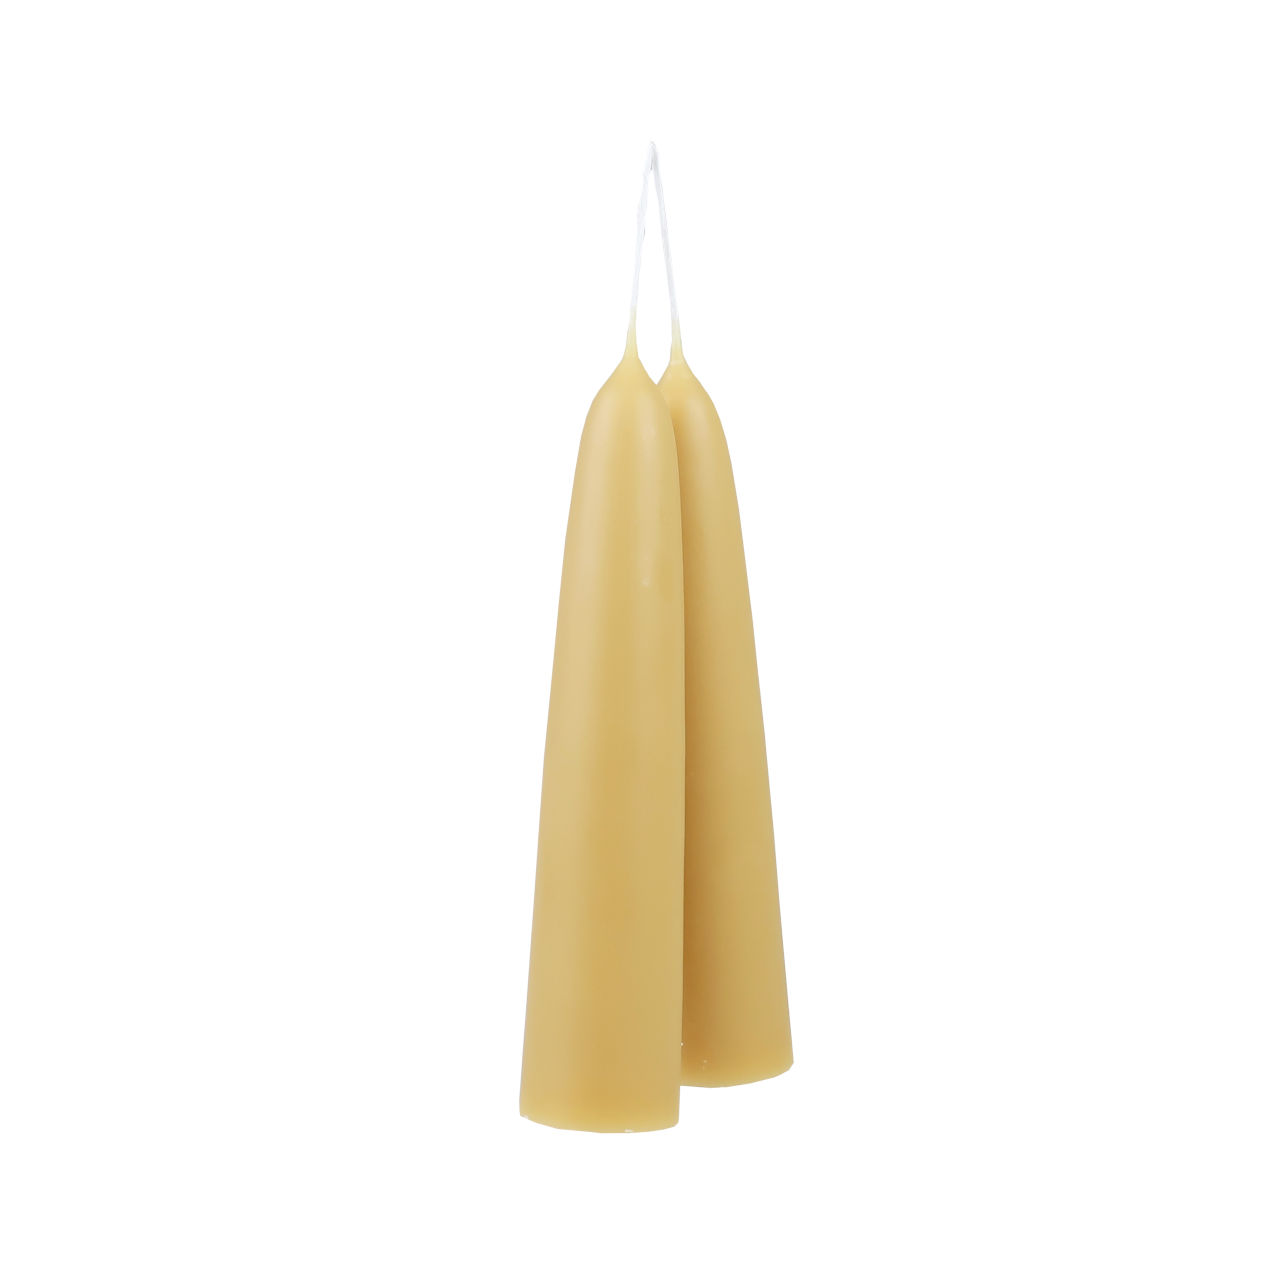 Moorlands Candles Pair of Giant Stubby Beeswax Candles